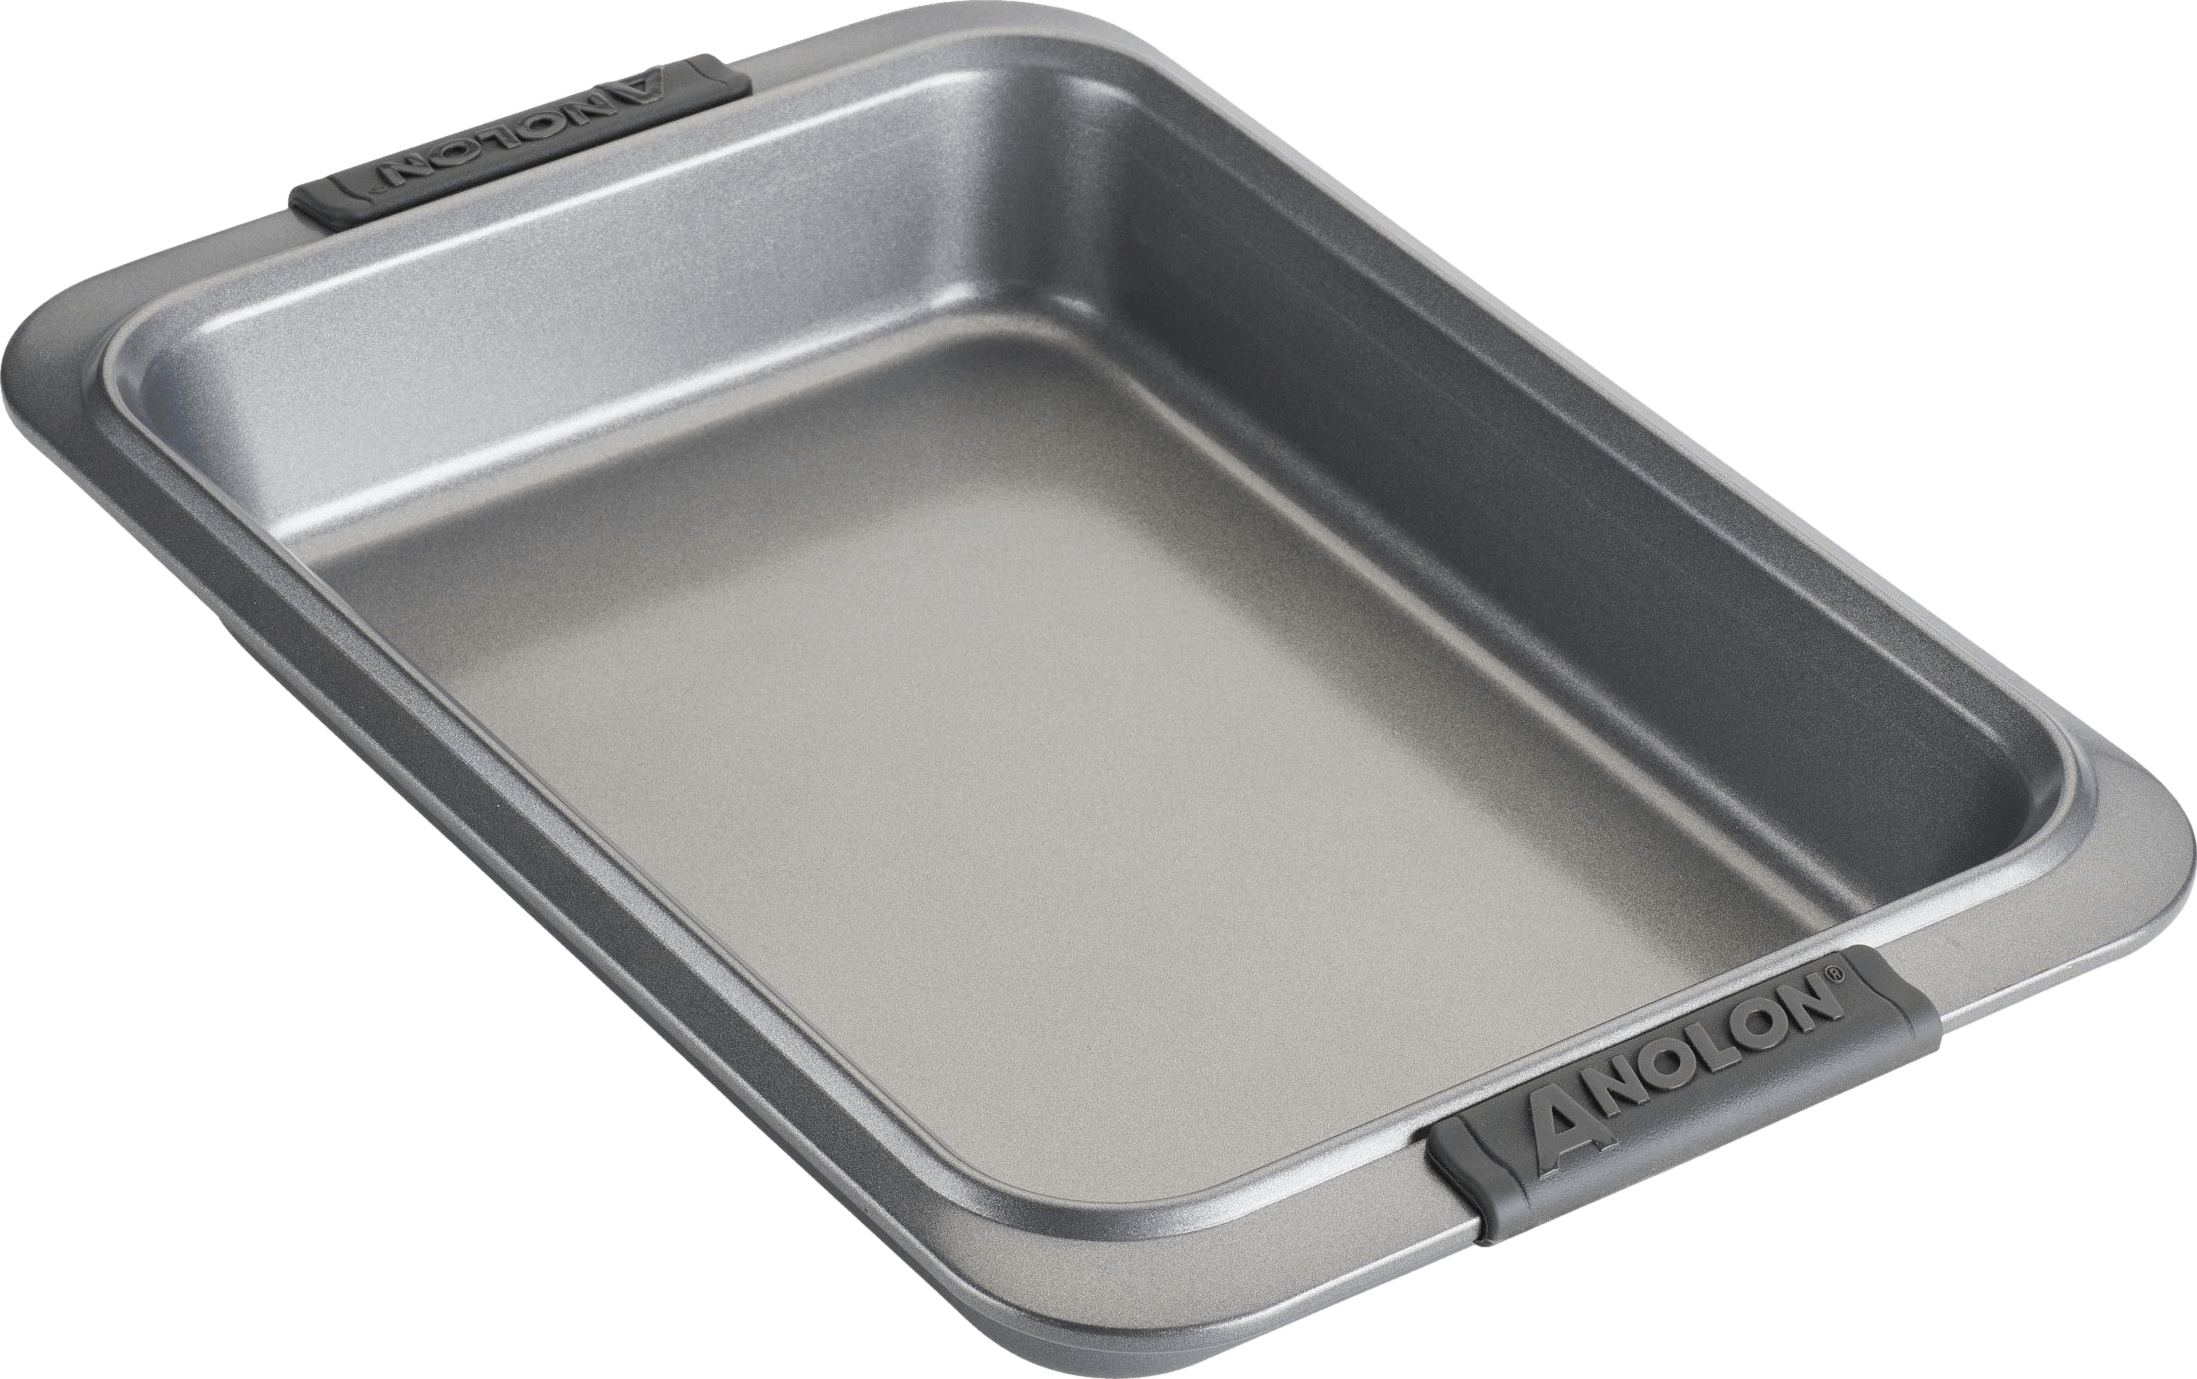 Anolon Advanced Bakeware Nonstick Rectangular Cake Pan, 9-Inch x 13-Inch, Gray with Silicone Grips